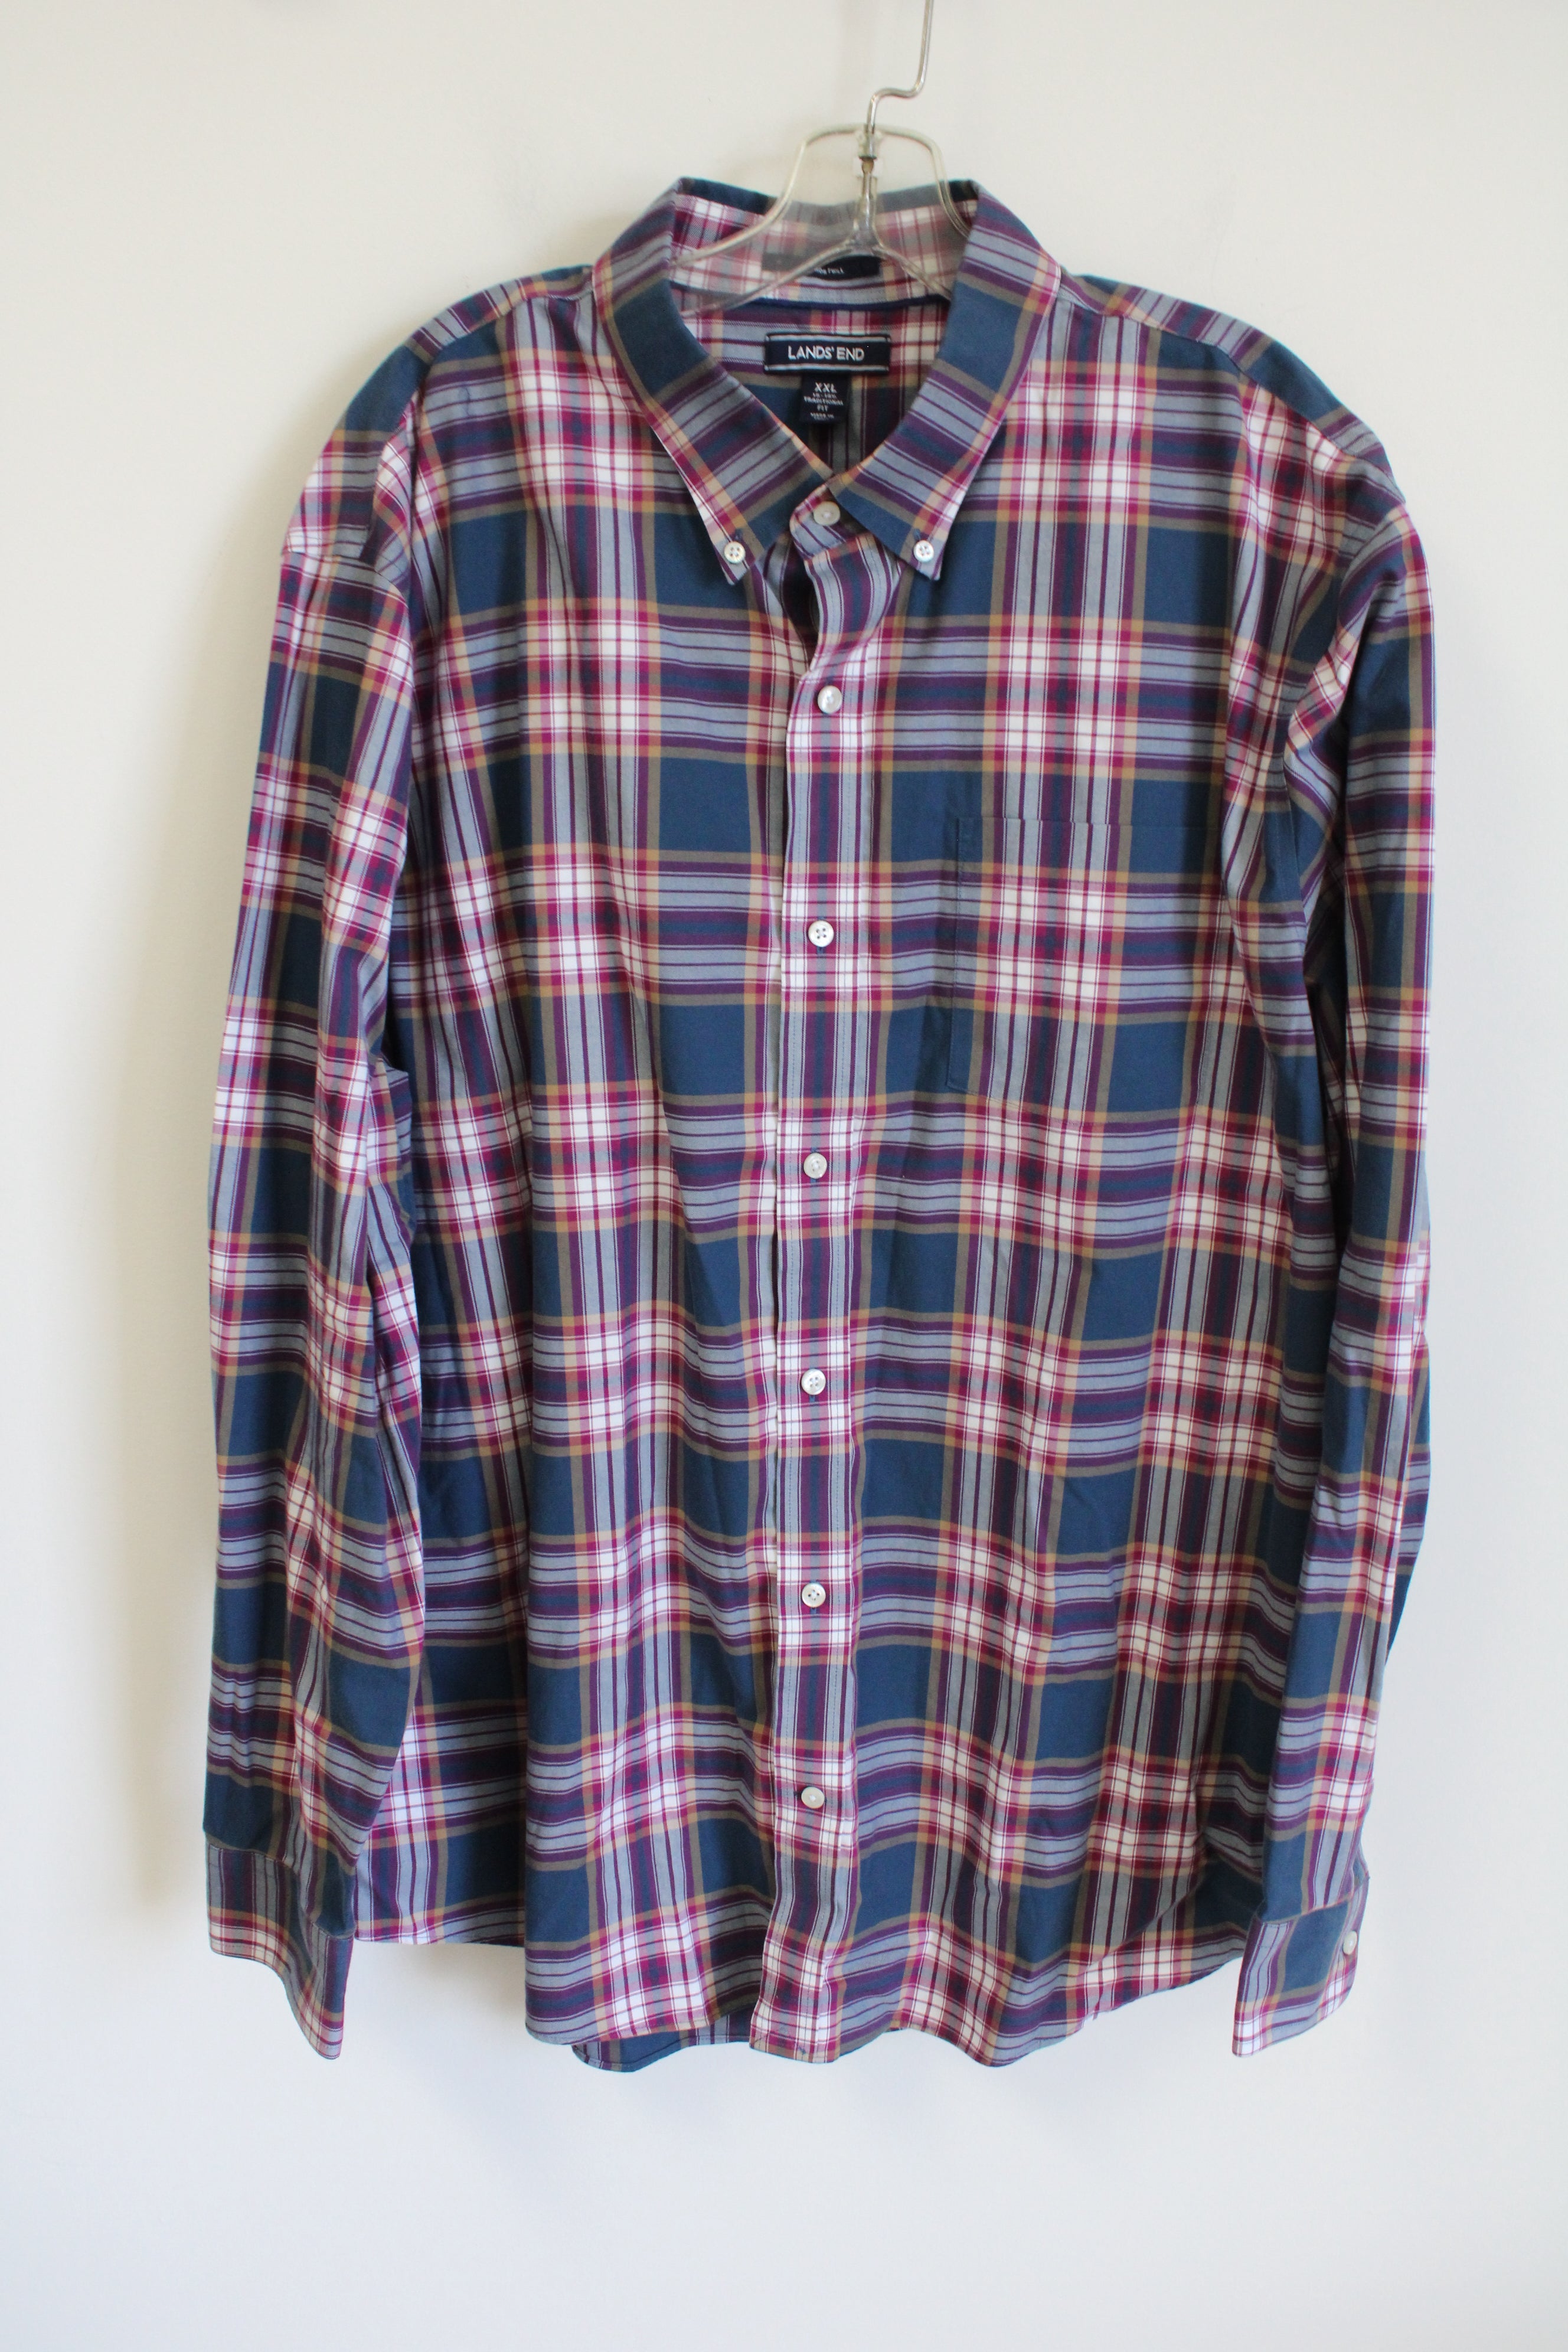 Lands' End Traditional Fit Multi Colored Plaid Long Sleeved Button Down Shirt | XXL